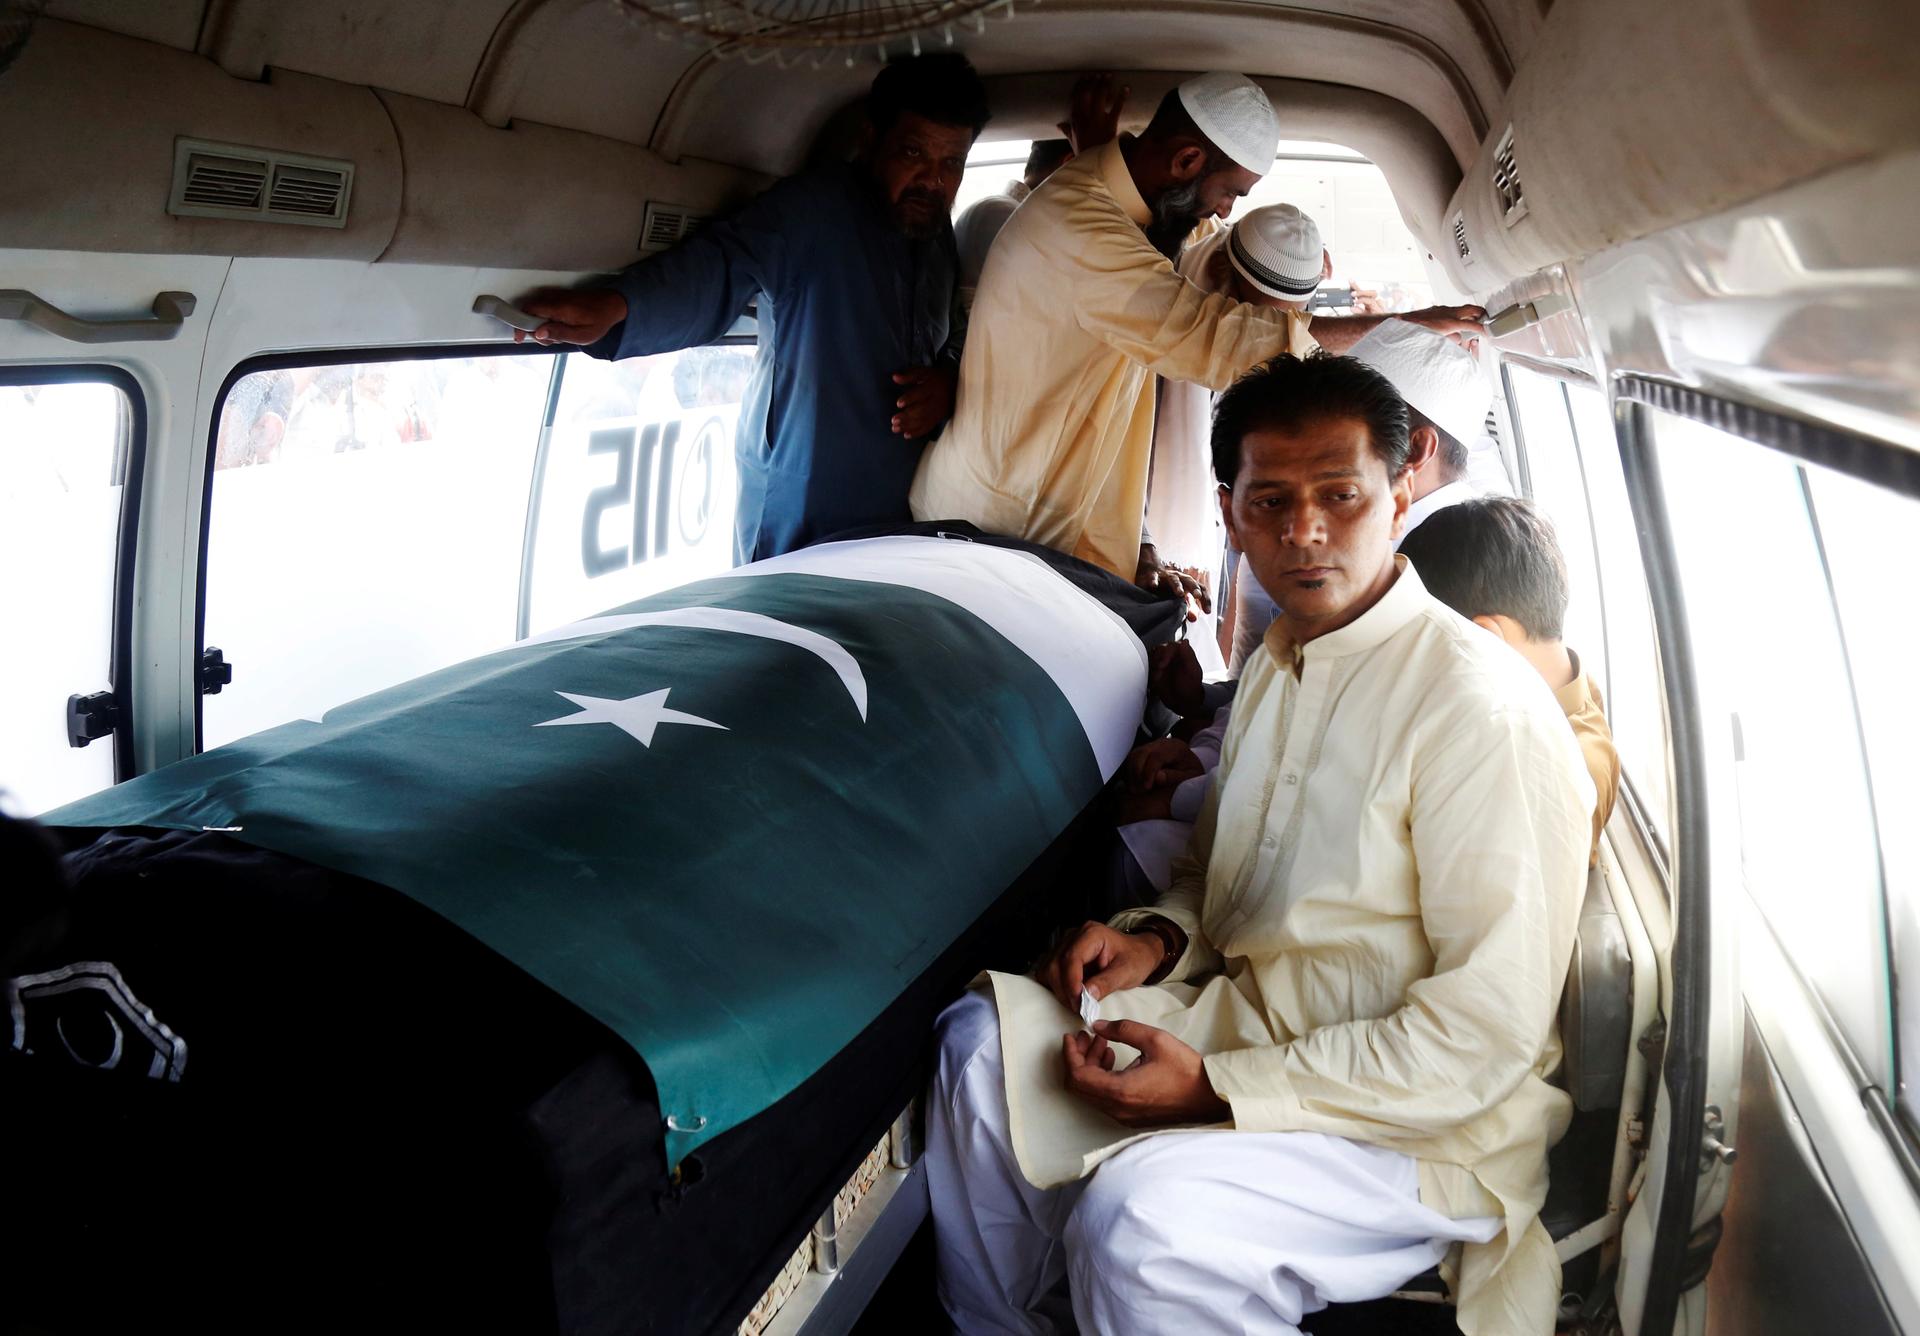 Man inside van sits next to coffin with Pakistan flag draped over, others standing nearby in close quarters